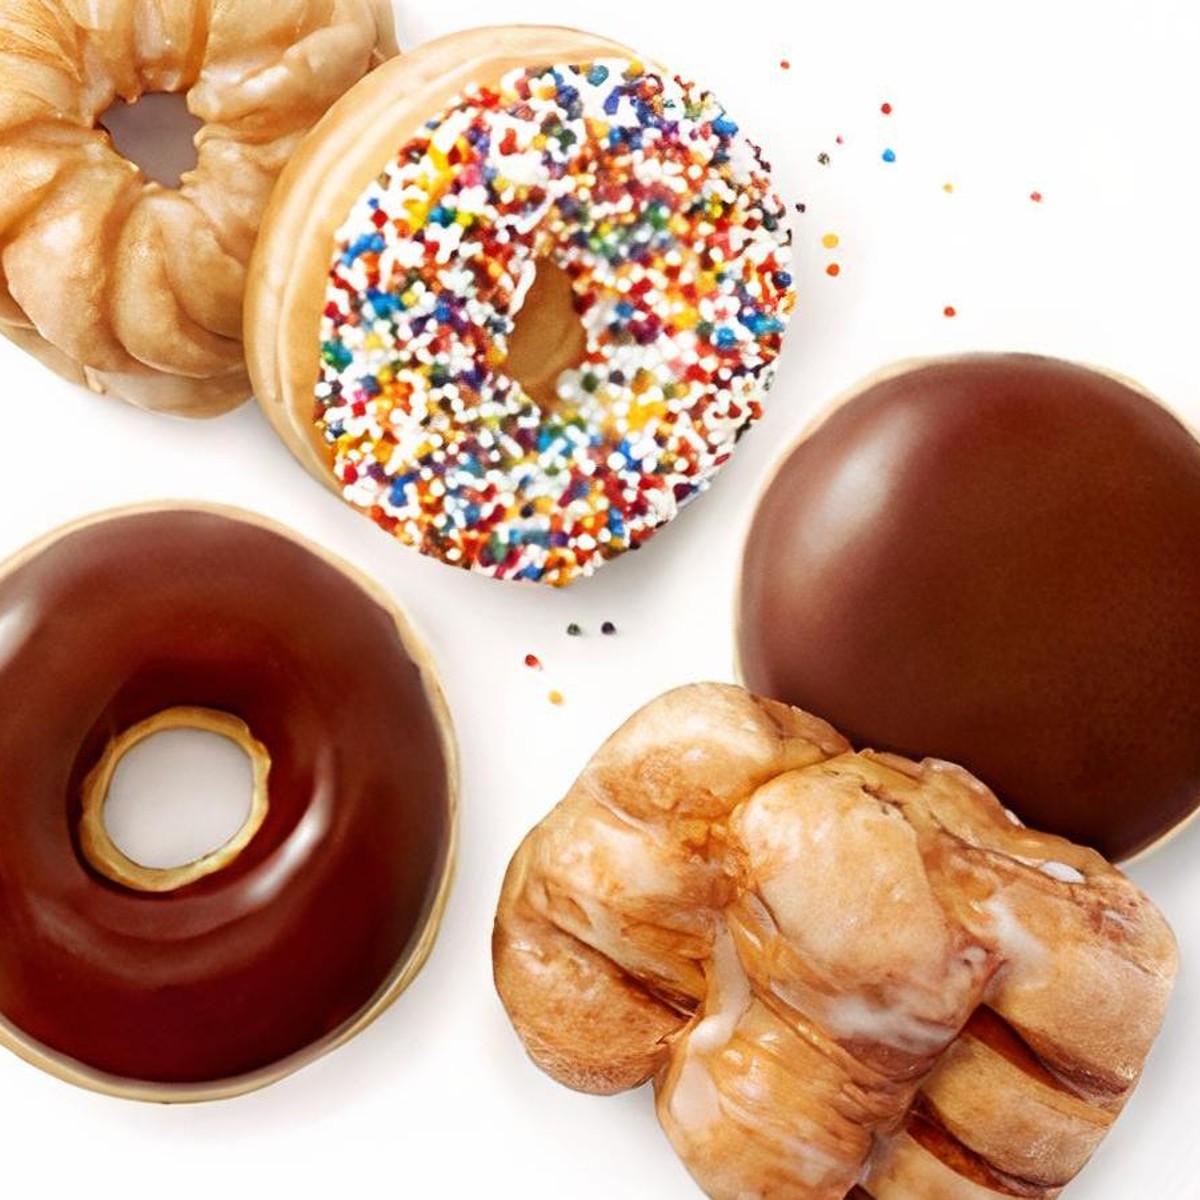 Tim Hortons offering $0.50 donuts for National Donut Day